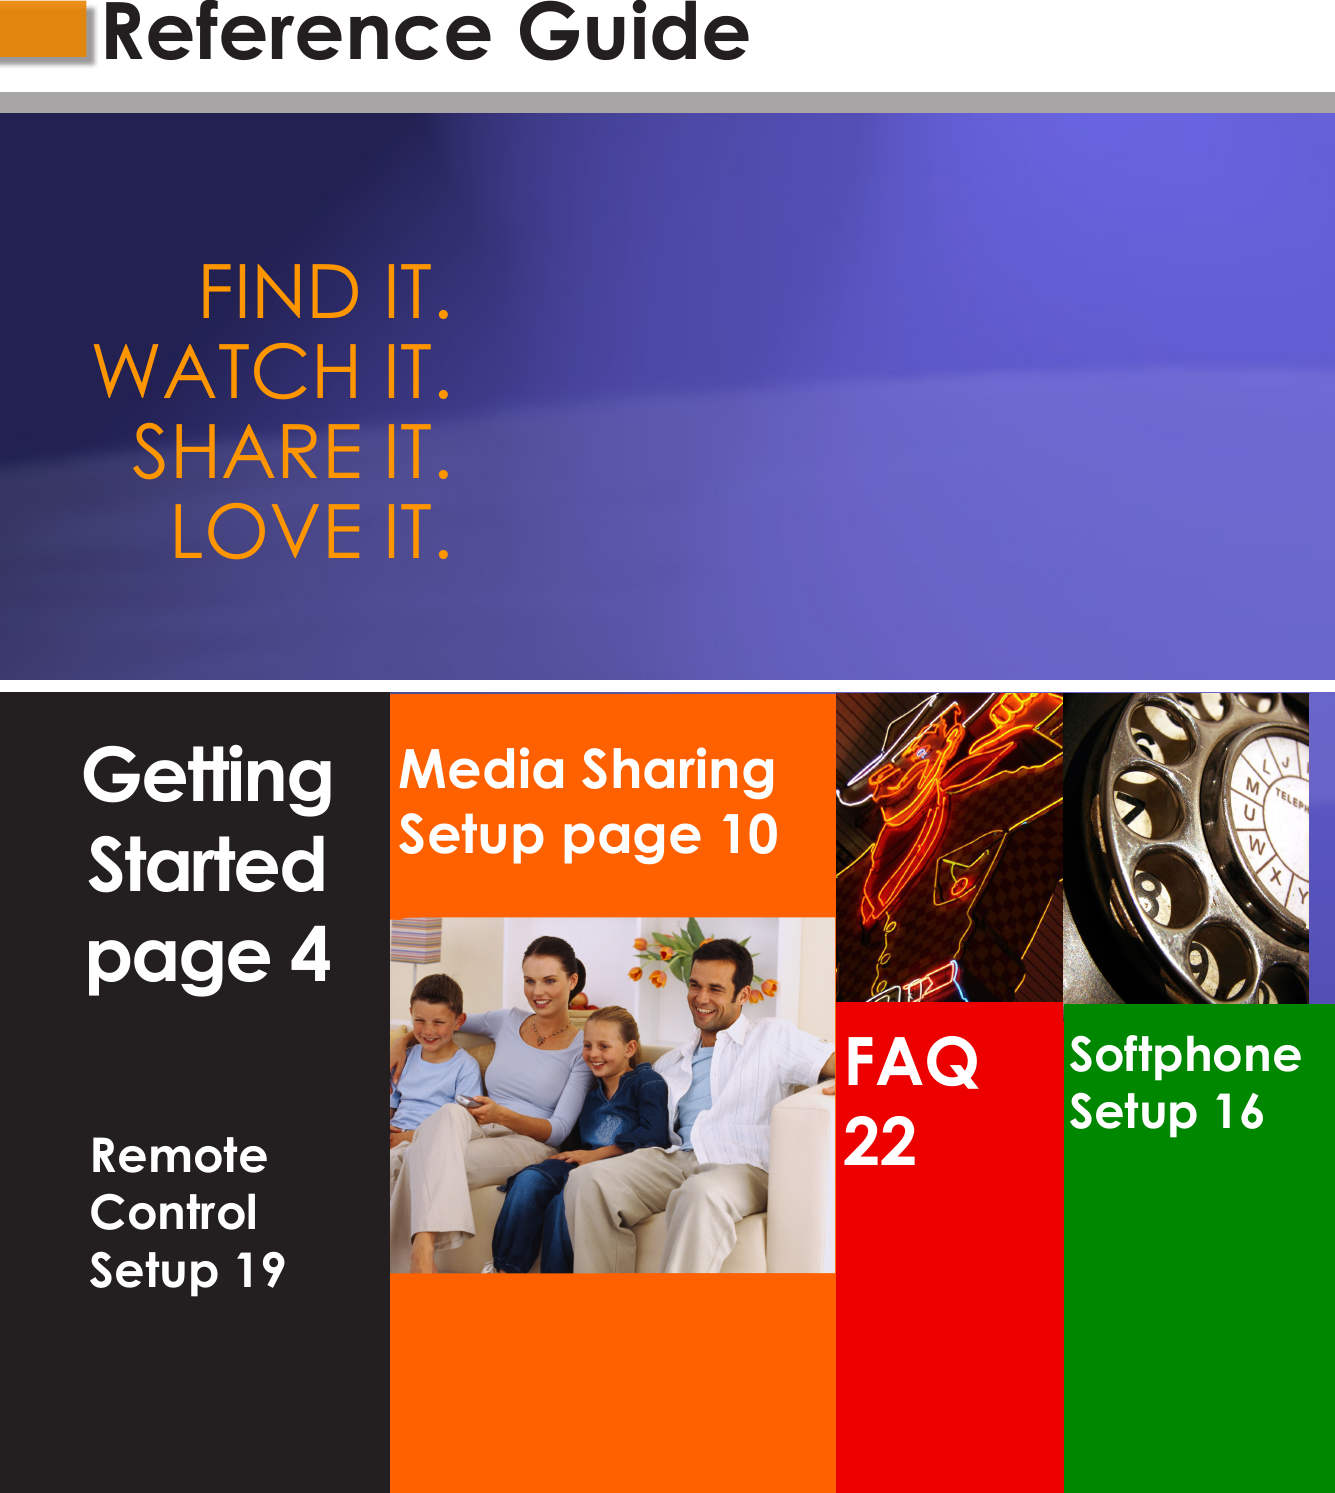 Media Sharing Setup page 10FAQ 22Softphone Setup 16FIND IT. WATCH IT.SHARE IT.LOVE IT.Getting Started page 4Reference GuideRemote Control Setup 19